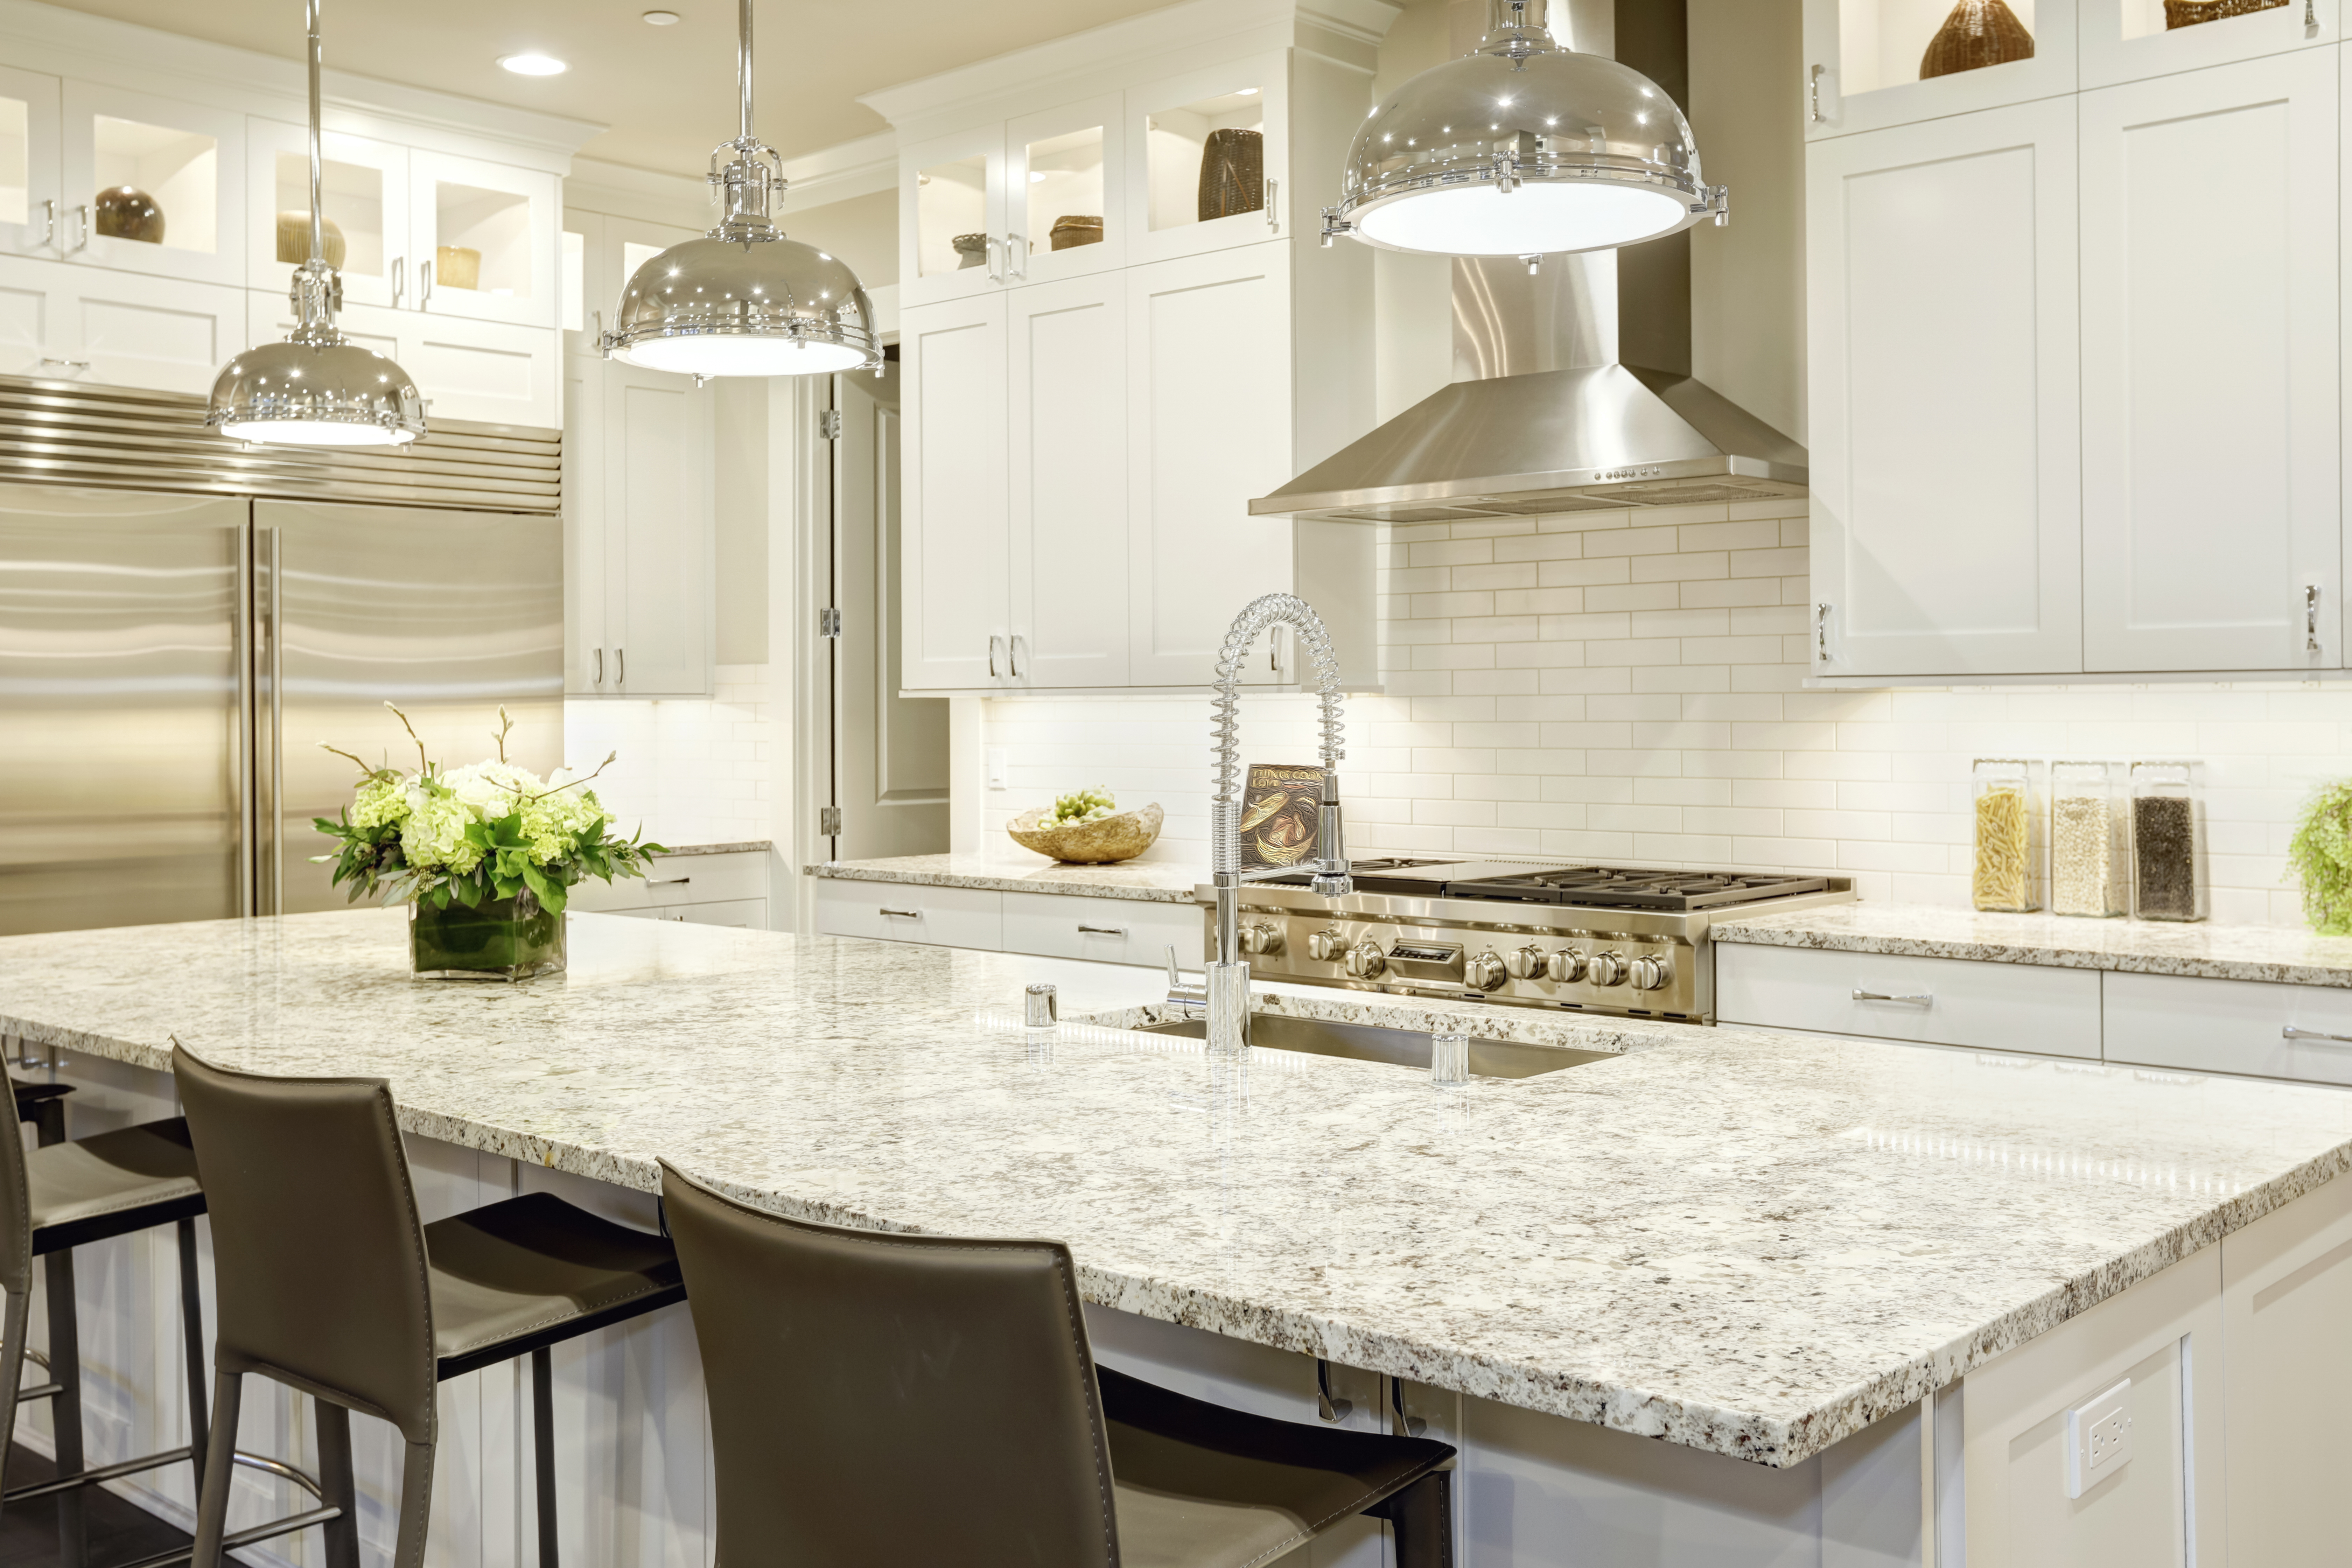 White kitchen design features large bar style kitchen island with granite countertop illuminated by modern pendant lights. Stainless steel appliances framed by white shaker cabinets